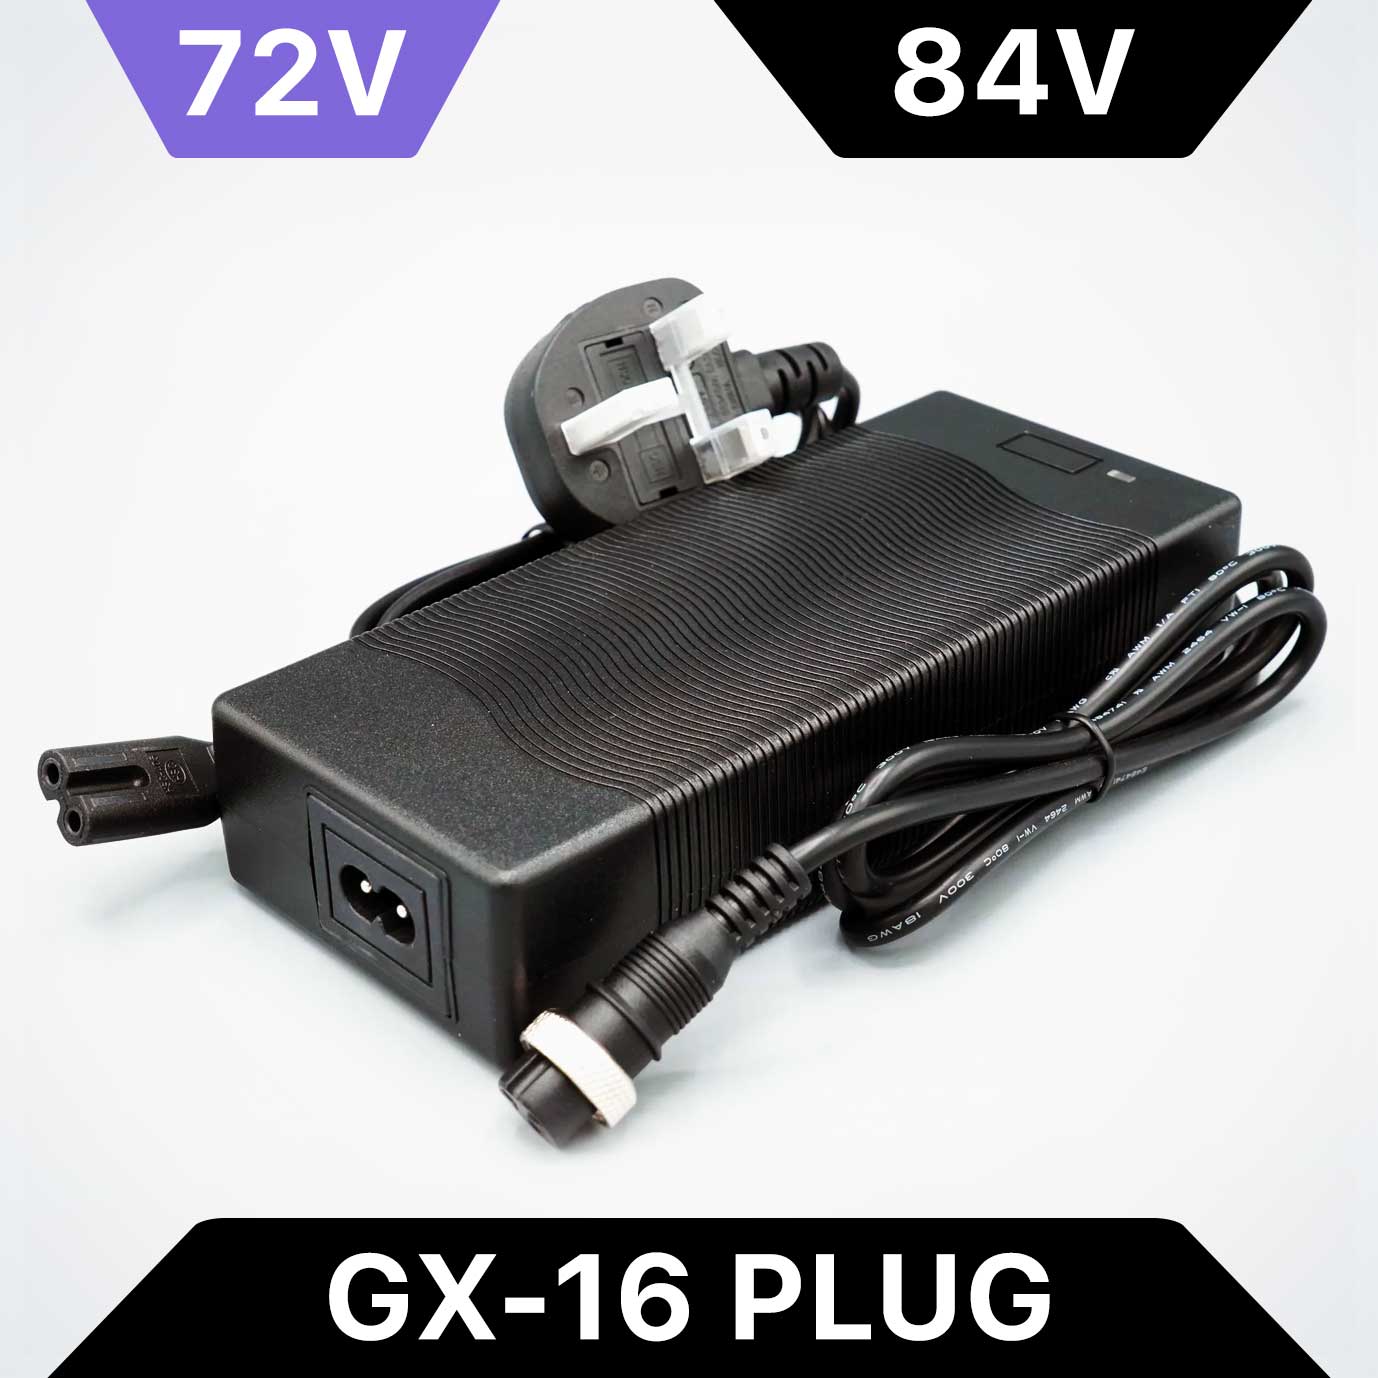 72V 1.4A Slow Charger for Dualtron, 84V Max, GX16 a